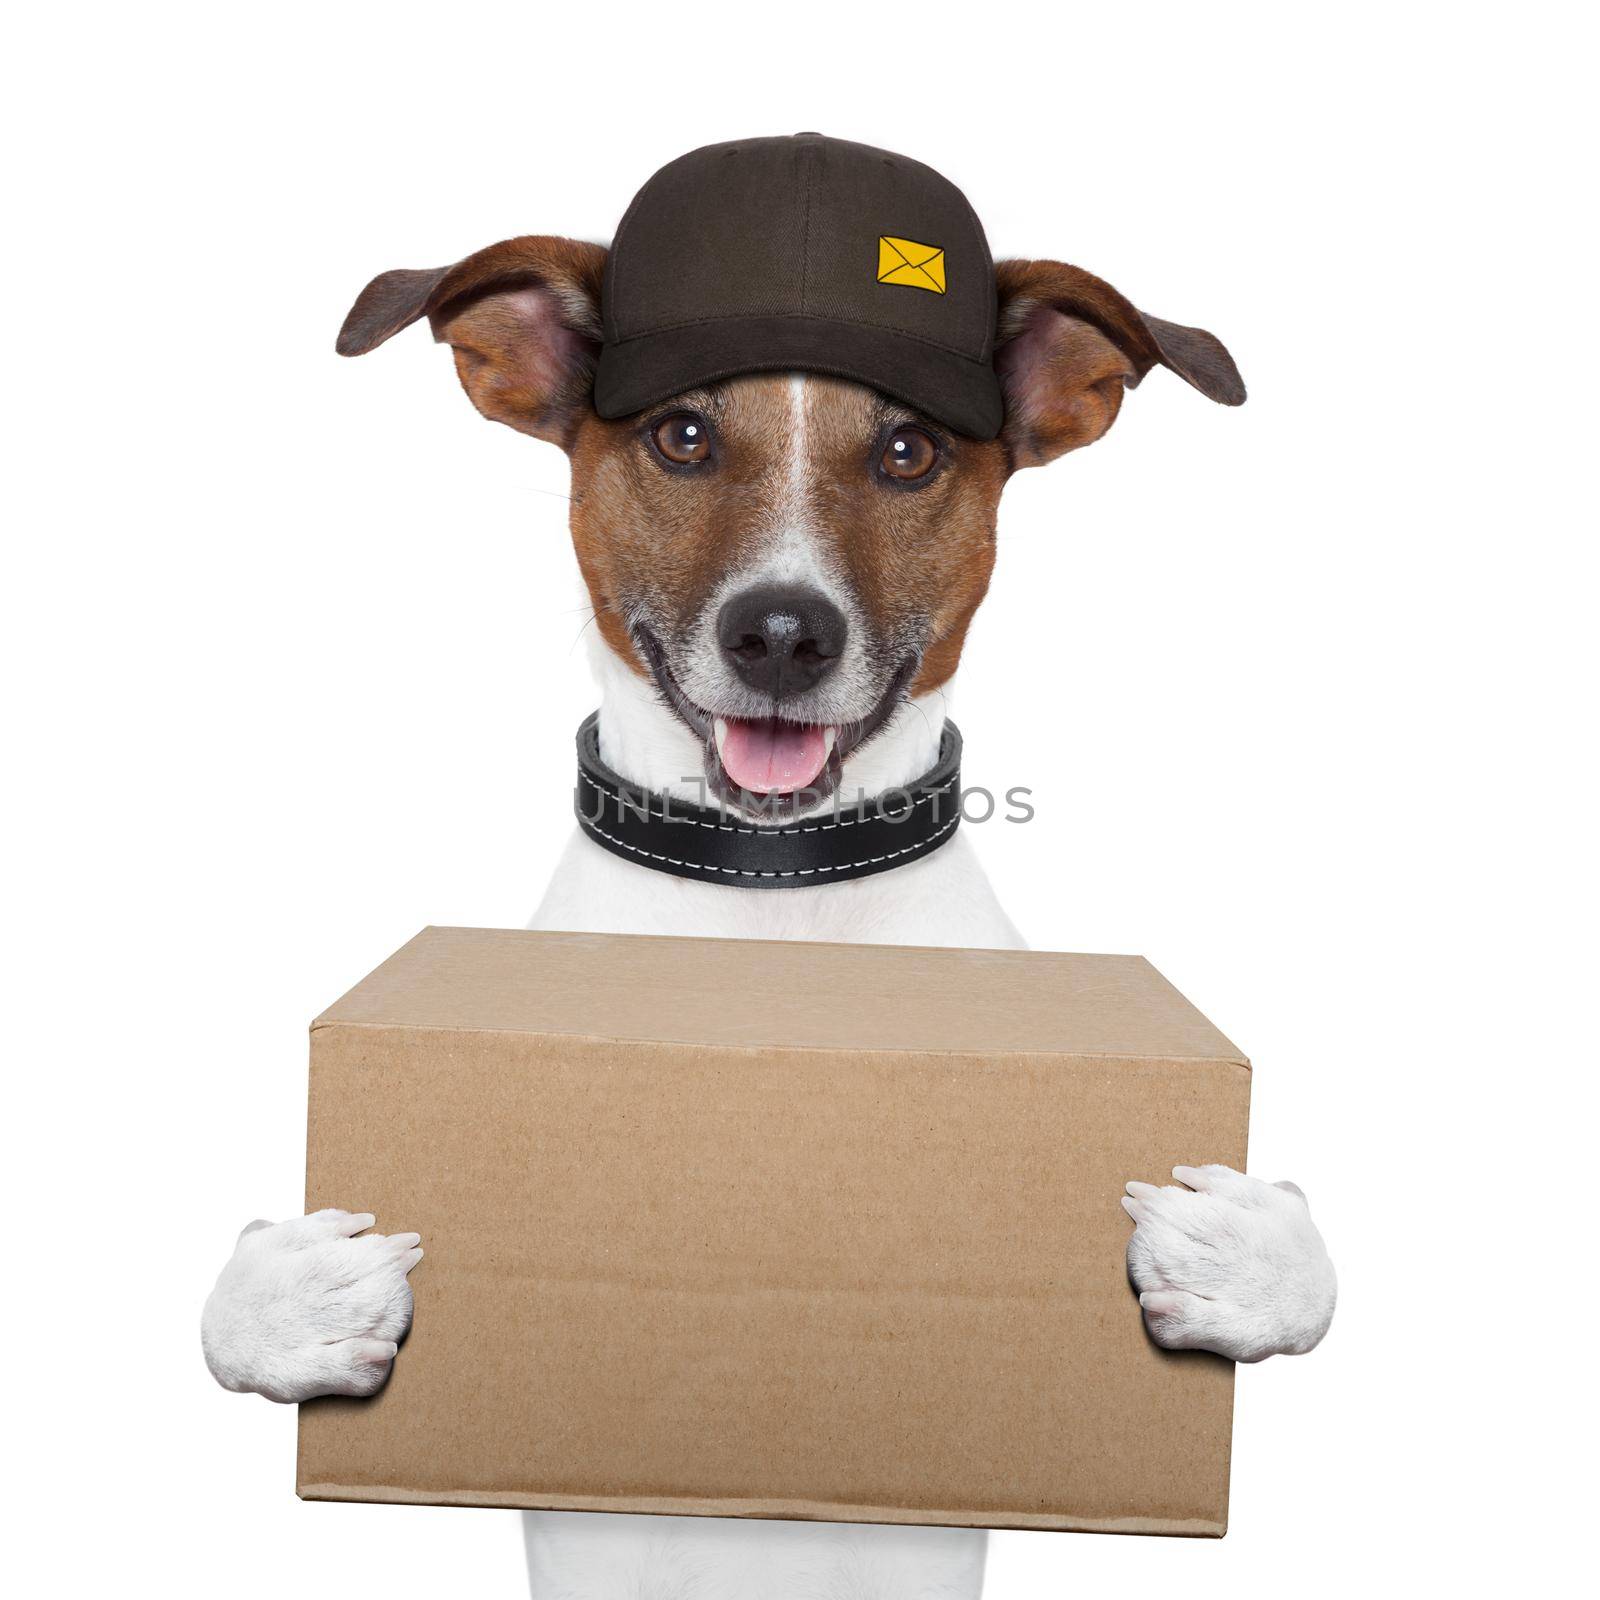 dog delivery post by Brosch